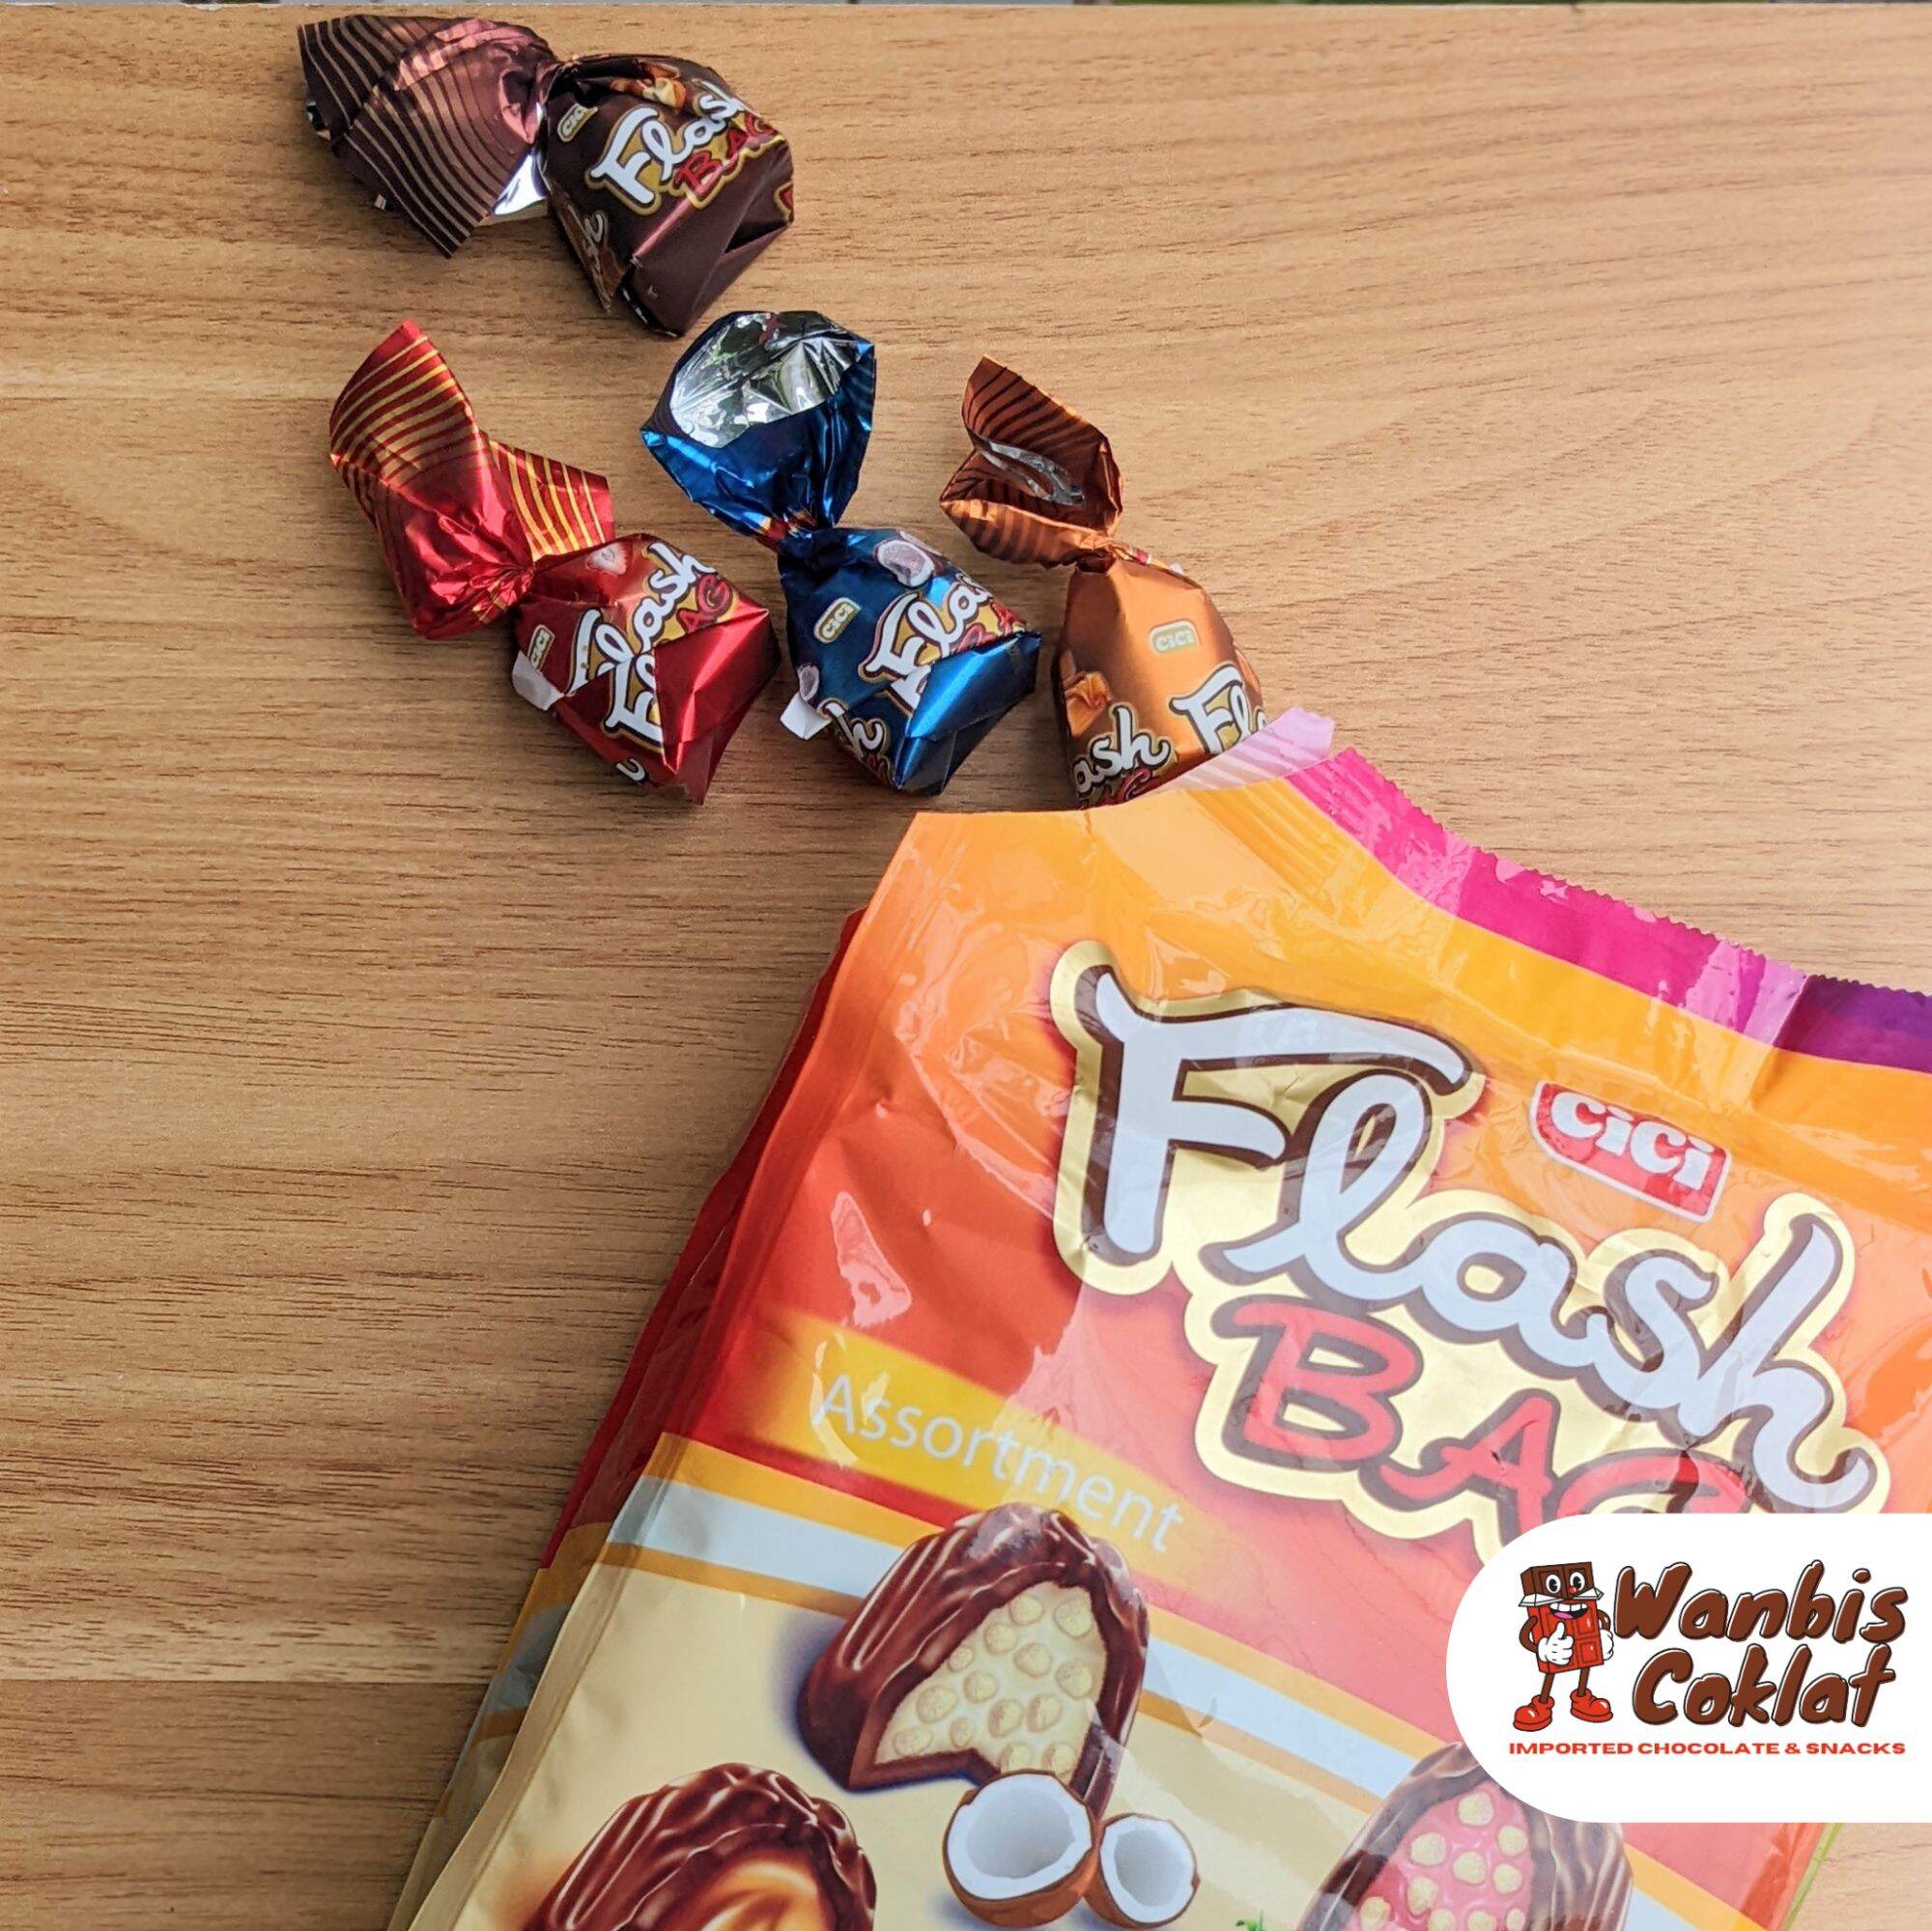 Cici Flash Chocolate Assorted 1kg offer at KM Trading